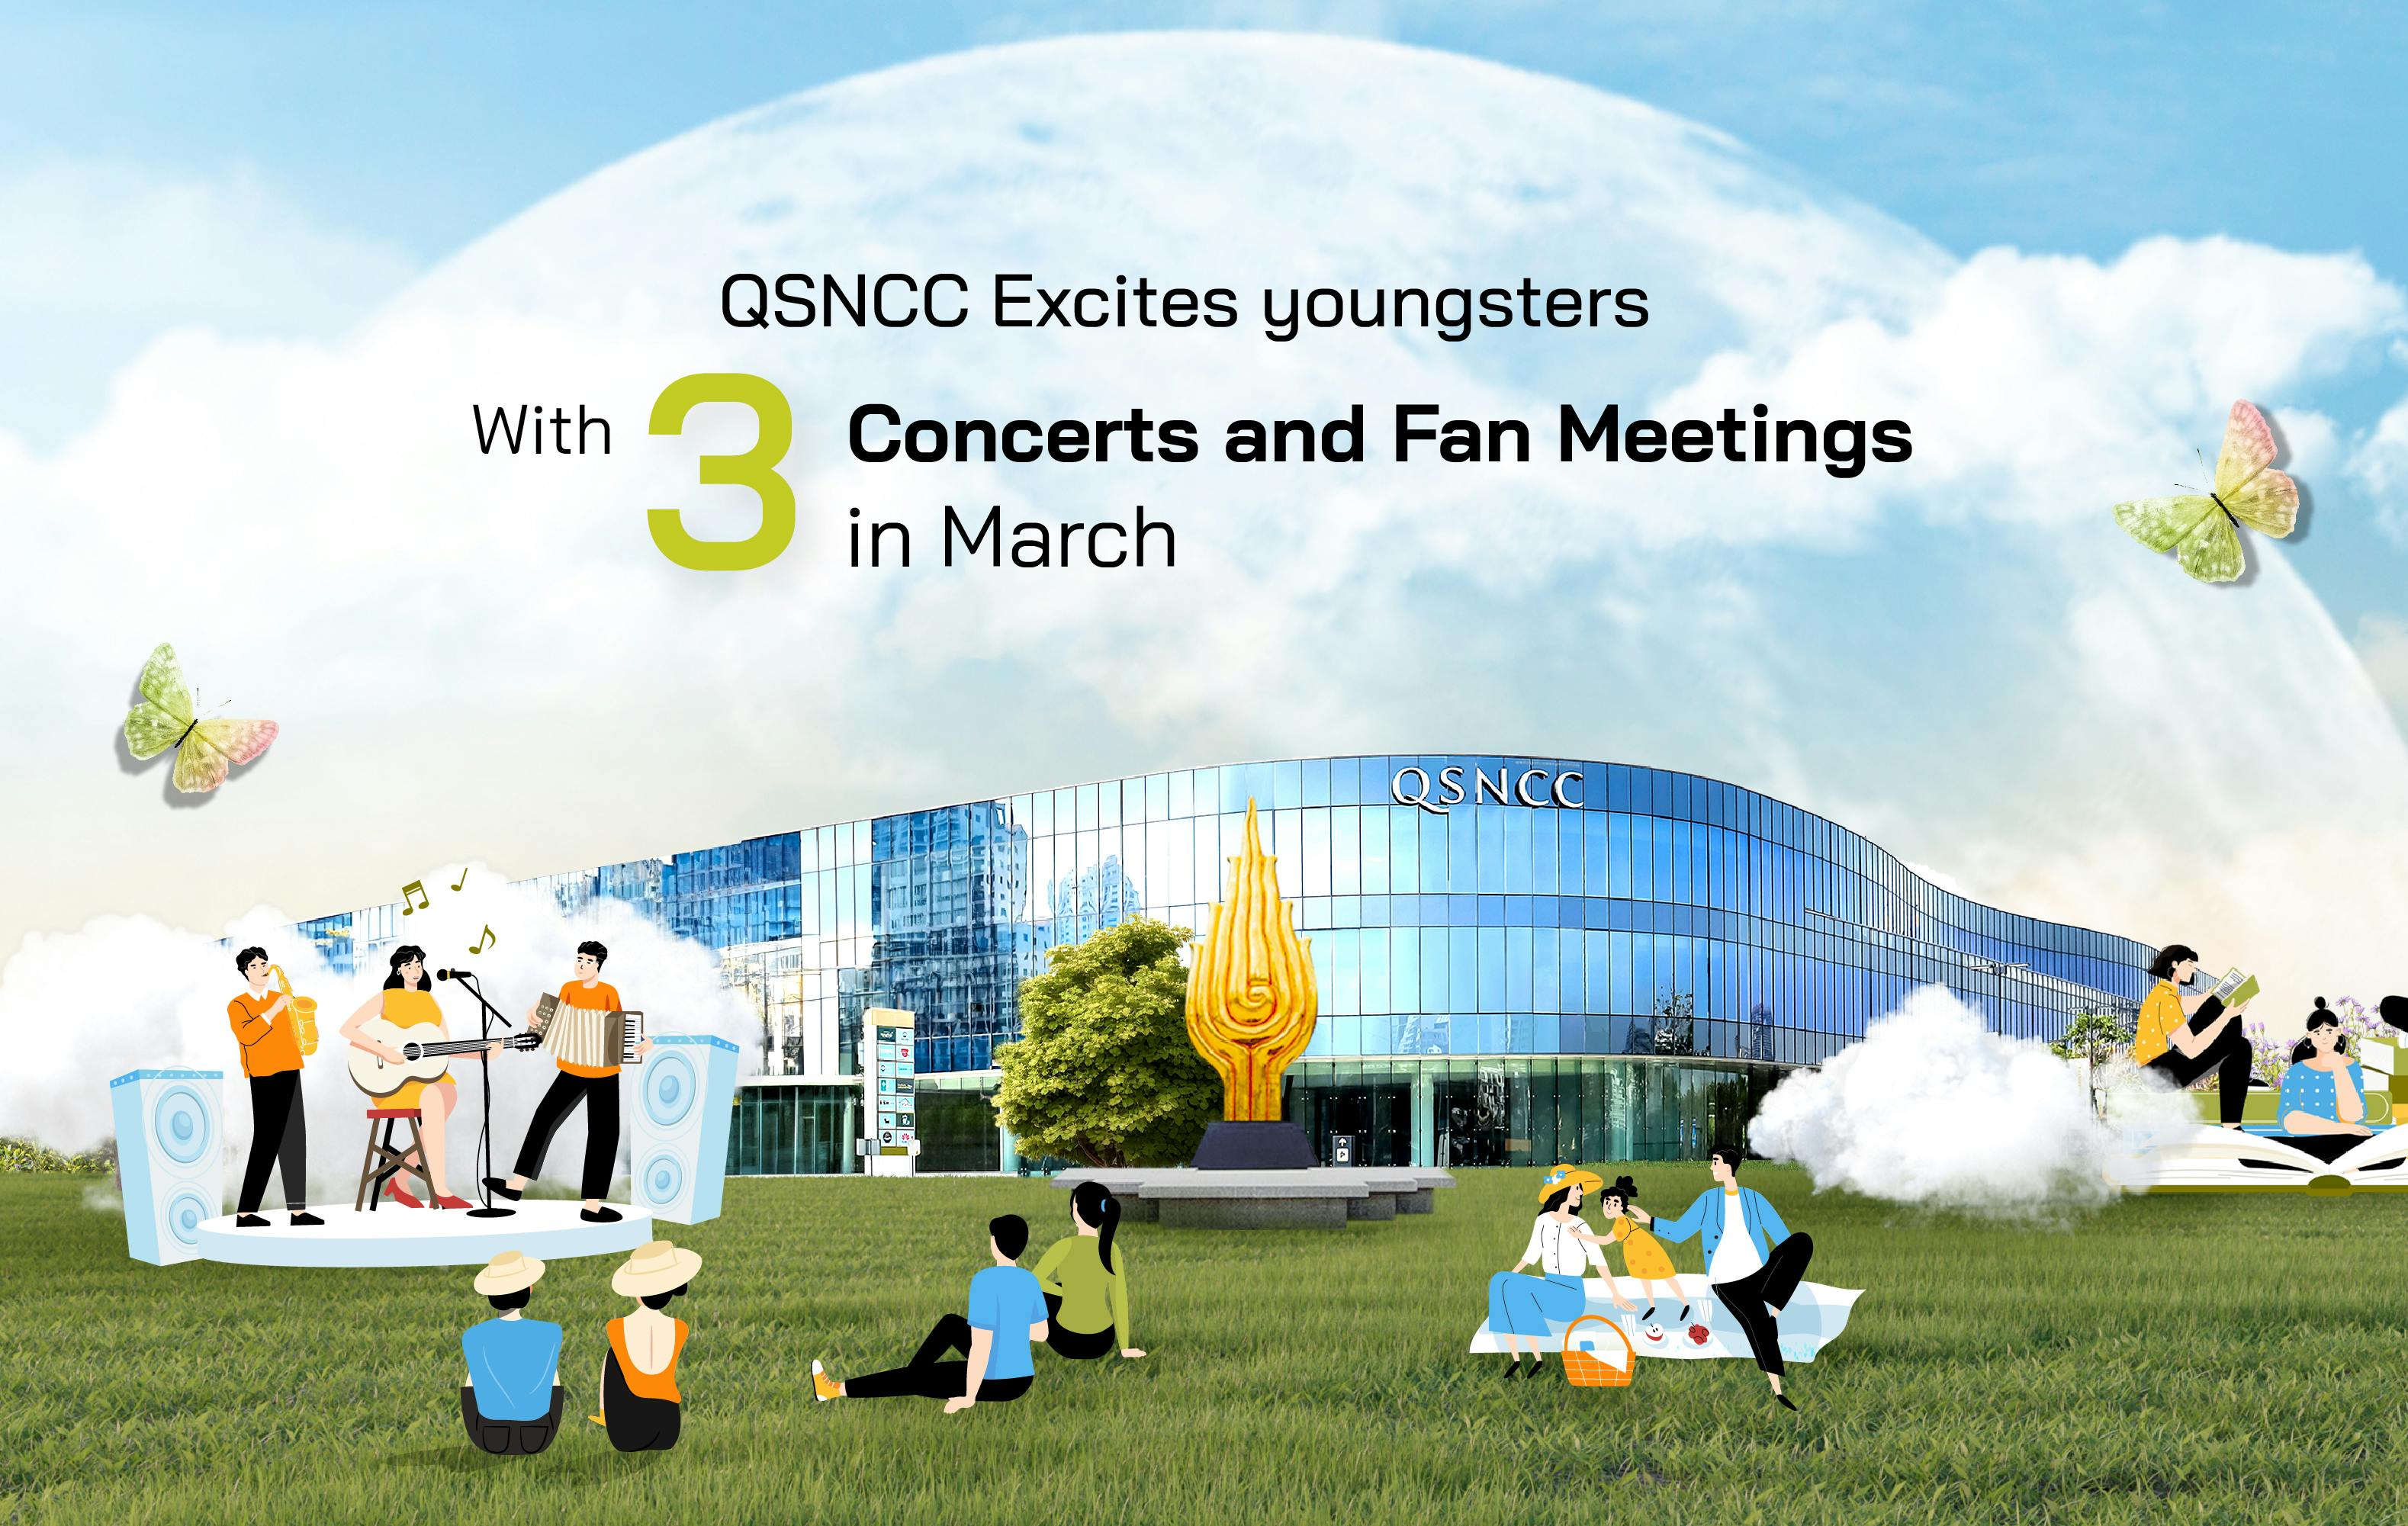 QSNCC excites youngsters with three concerts and fan meetings in March